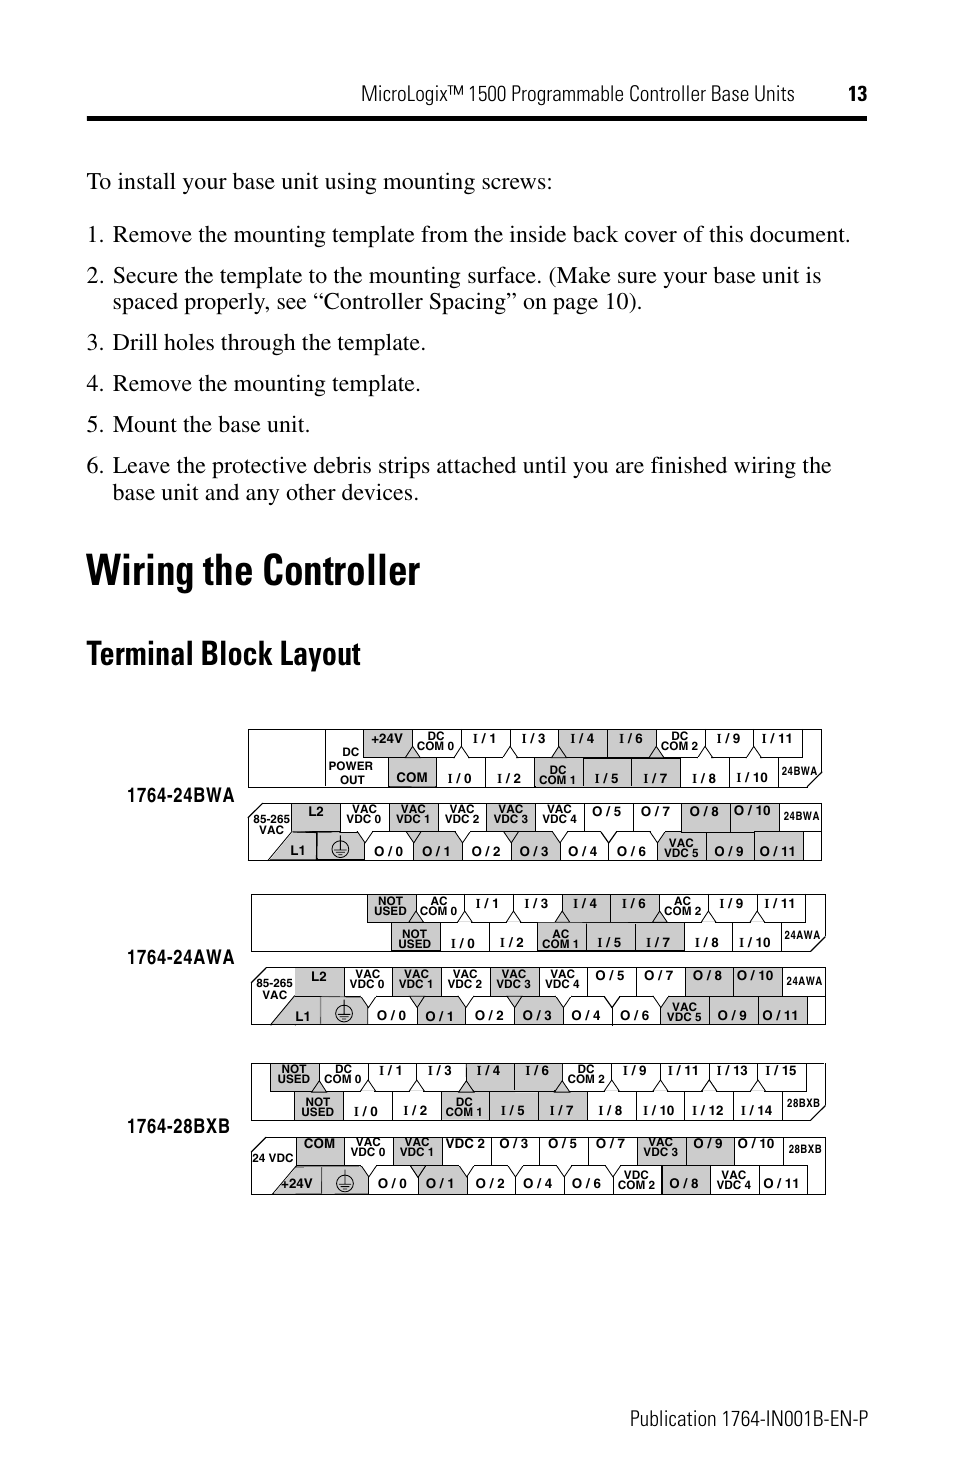 Wiring the controller, Terminal block layout | Rockwell Automation 1764-28BXB MicroLogix 1500 Programmable Controller Base Units User Manual | Page 13 / 27